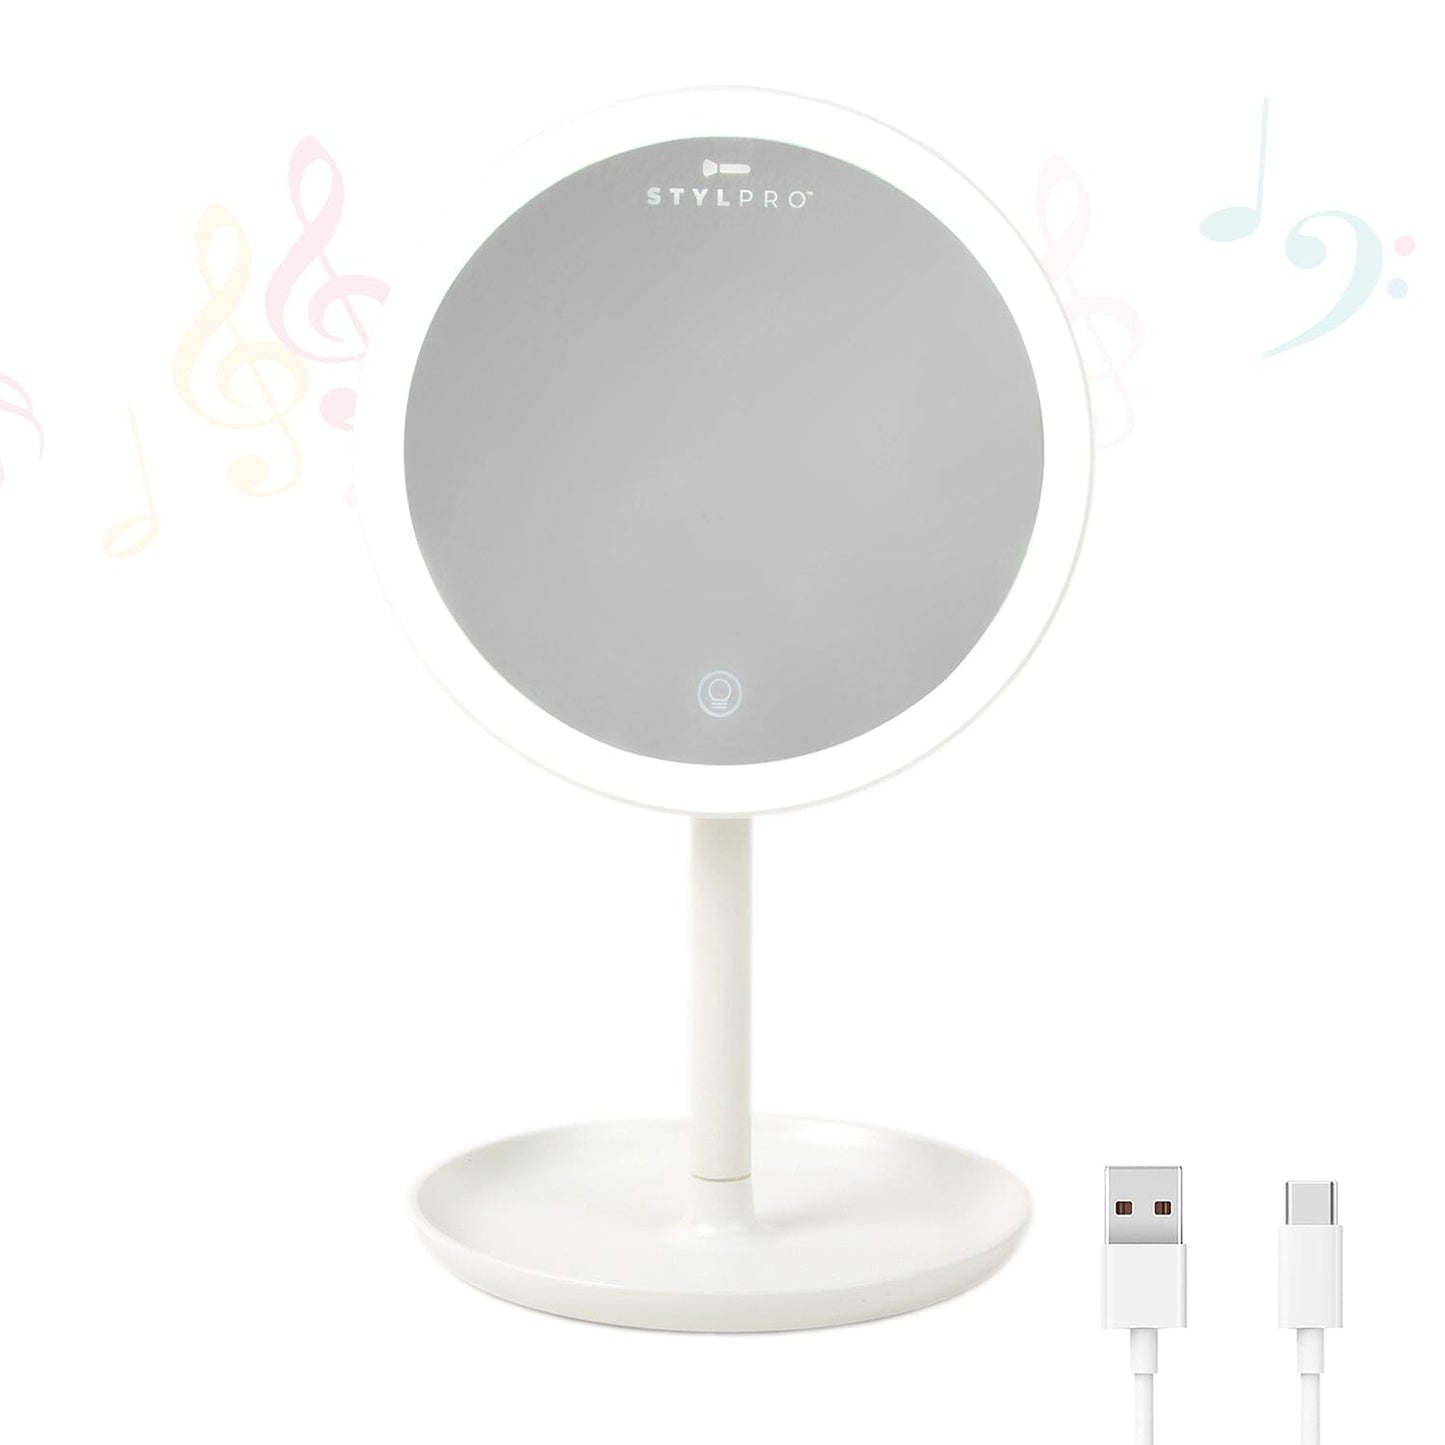 STYLPRO Melody Rechargeable Bluetooth Mirror